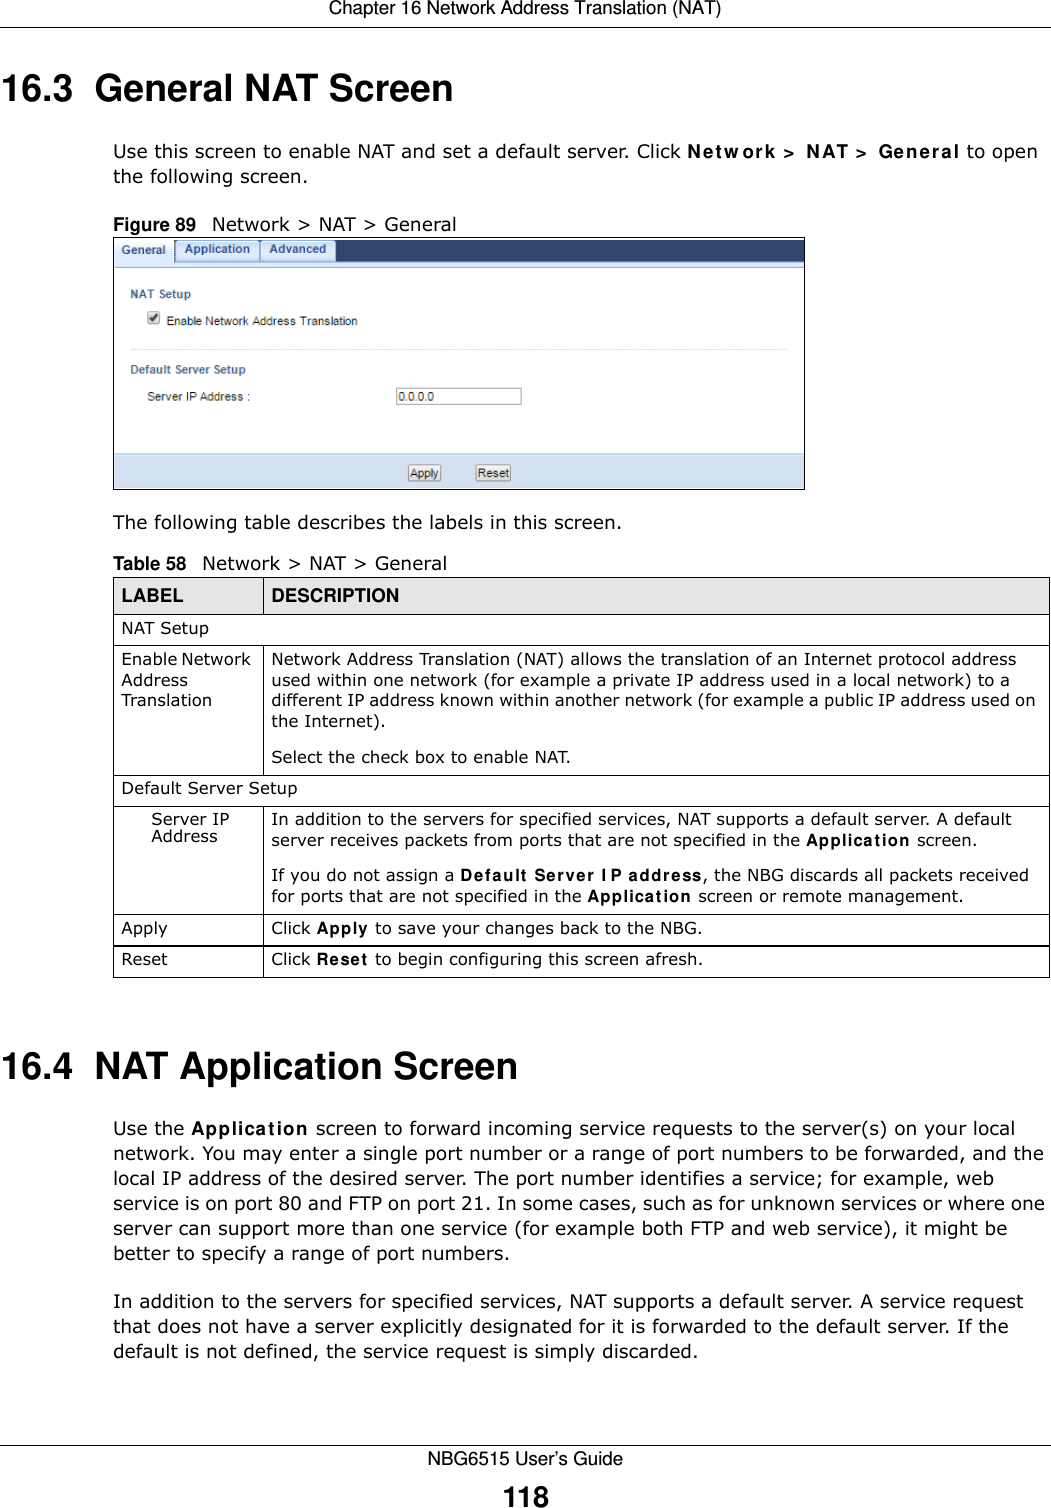 Chapter 16 Network Address Translation (NAT)NBG6515 User’s Guide11816.3  General NAT ScreenUse this screen to enable NAT and set a default server. Click Network &gt; NAT &gt; General to open the following screen.Figure 89   Network &gt; NAT &gt; General The following table describes the labels in this screen.16.4  NAT Application Screen   Use the Application screen to forward incoming service requests to the server(s) on your local network. You may enter a single port number or a range of port numbers to be forwarded, and the local IP address of the desired server. The port number identifies a service; for example, web service is on port 80 and FTP on port 21. In some cases, such as for unknown services or where one server can support more than one service (for example both FTP and web service), it might be better to specify a range of port numbers.In addition to the servers for specified services, NAT supports a default server. A service request that does not have a server explicitly designated for it is forwarded to the default server. If the default is not defined, the service request is simply discarded.Table 58   Network &gt; NAT &gt; GeneralLABEL DESCRIPTIONNAT SetupEnable Network Address TranslationNetwork Address Translation (NAT) allows the translation of an Internet protocol address used within one network (for example a private IP address used in a local network) to a different IP address known within another network (for example a public IP address used on the Internet). Select the check box to enable NAT.Default Server SetupServer IP Address In addition to the servers for specified services, NAT supports a default server. A default server receives packets from ports that are not specified in the Application screen. If you do not assign a Default Server IP address, the NBG discards all packets received for ports that are not specified in the Application screen or remote management.Apply Click Apply to save your changes back to the NBG.Reset Click Reset to begin configuring this screen afresh.